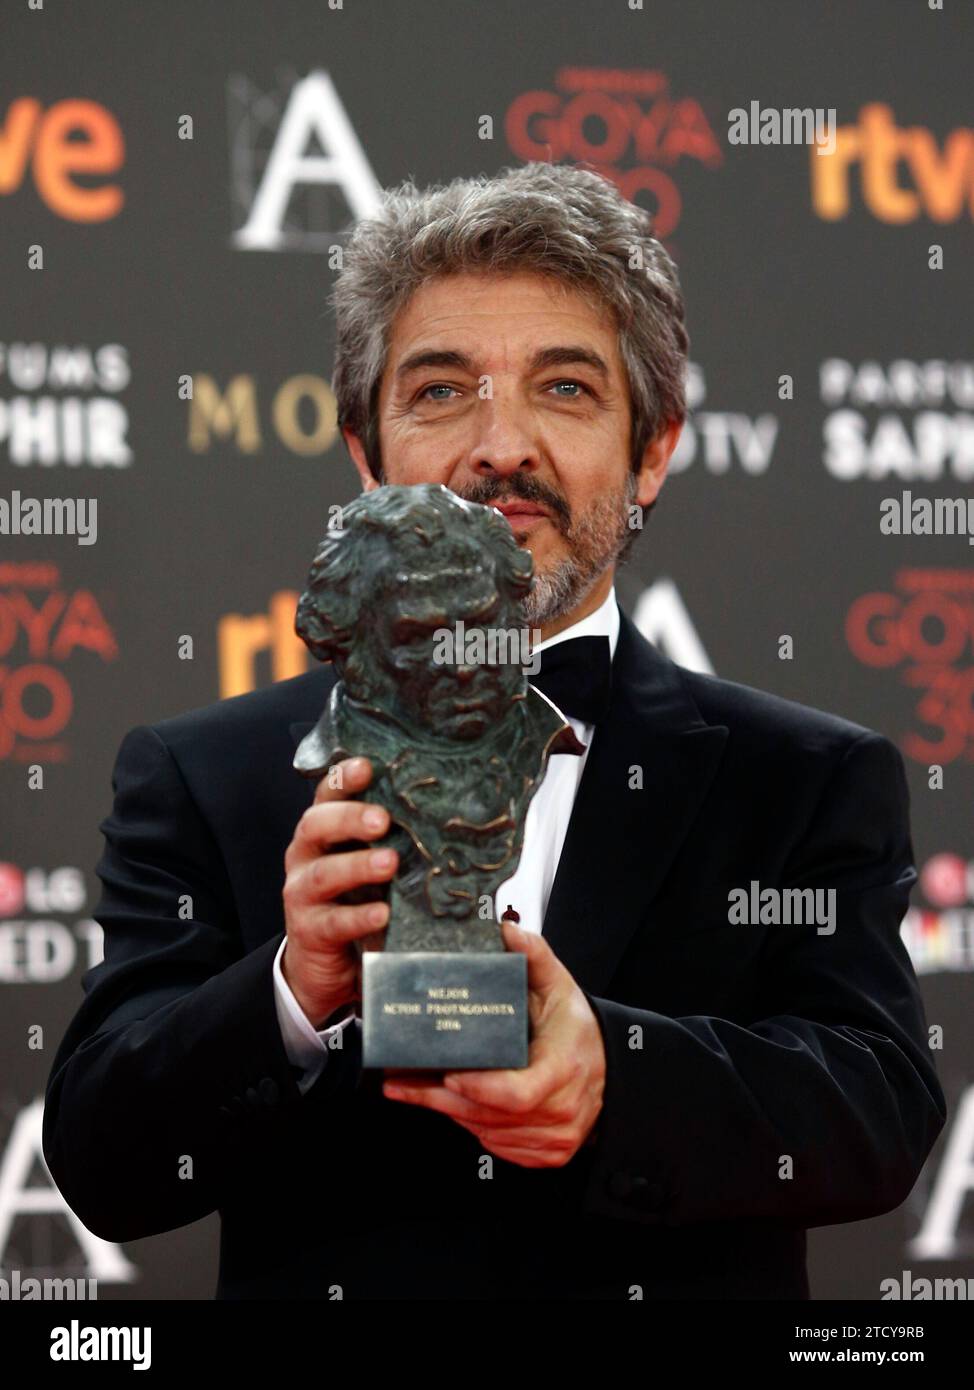 Madrid, 02/06/2016. Gala for the 30th edition of the Goya Awards. Ricardo Darín poses with his Goya for best actor. Photo: Oscar del Pozo ARCHDC. Credit: Album / Archivo ABC / Oscar del Pozo Stock Photo